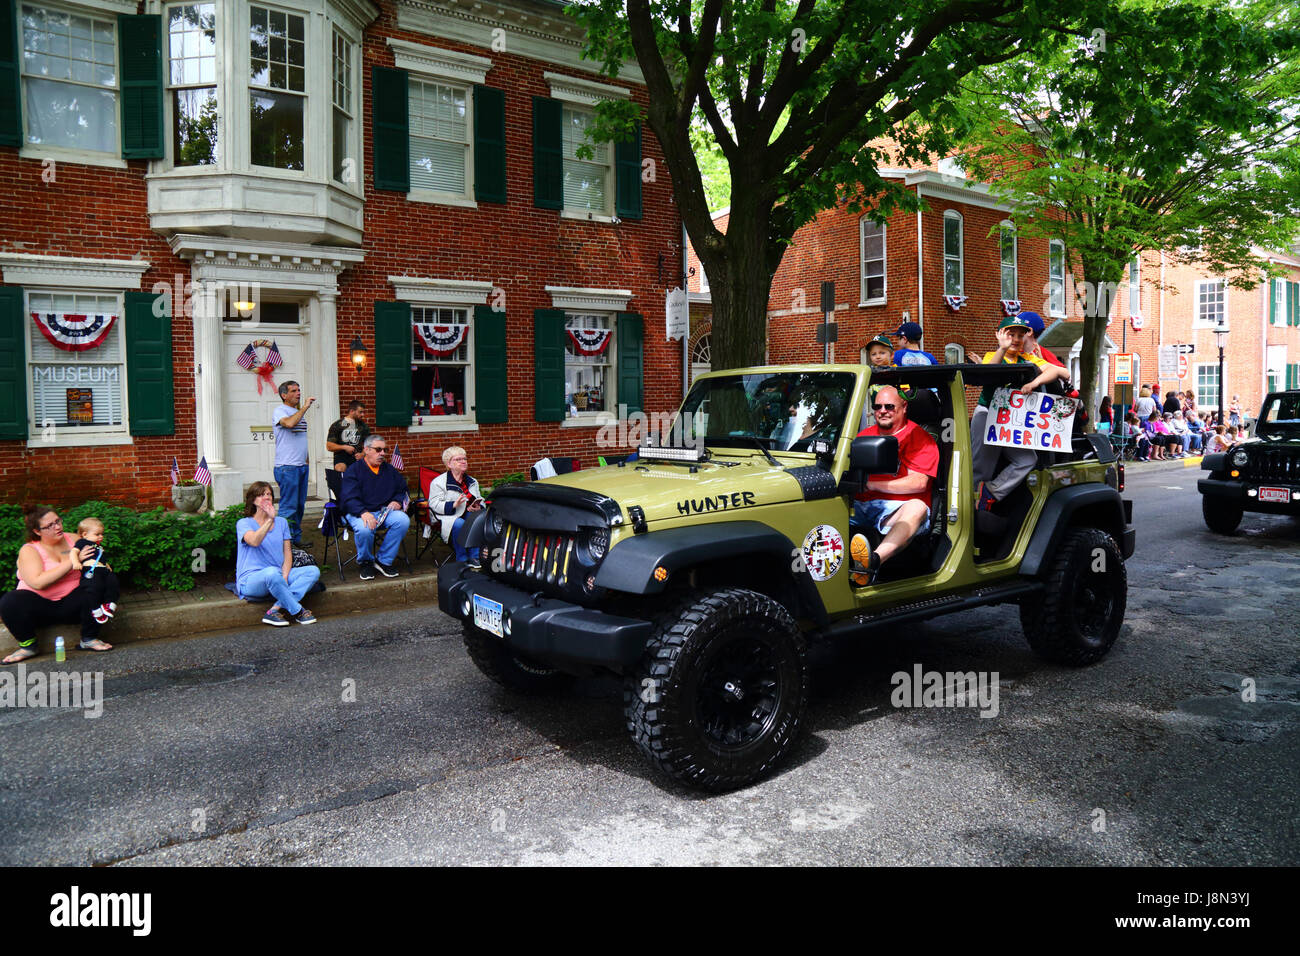 Westminster, Maryland, USA. 29th May, 2017. Schoolboys hold a handmade God Bless America placard and wave as they take part in parades for Memorial Day, a federal holiday in the United States for remembering those who died while serving in the country's armed forces. Credit: James Brunker/Alamy Live News Stock Photo